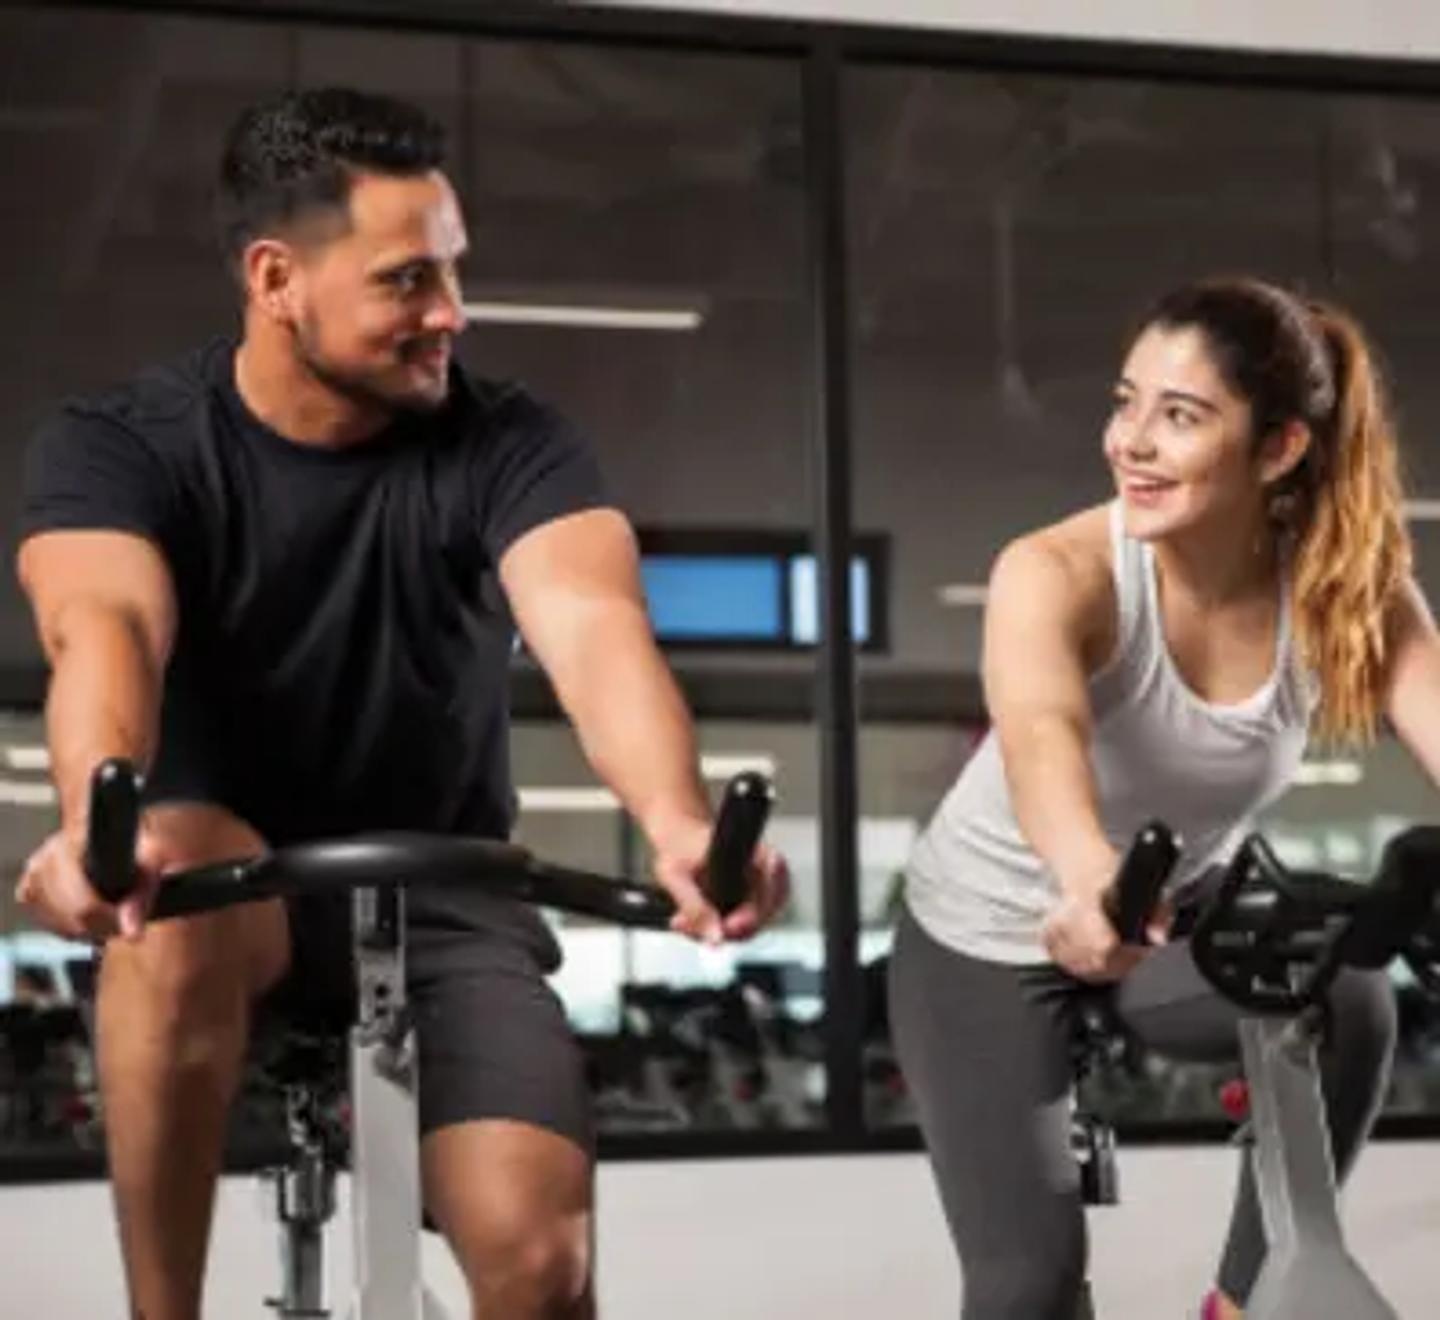 Indoor Cycling Instructor helping client at a gym